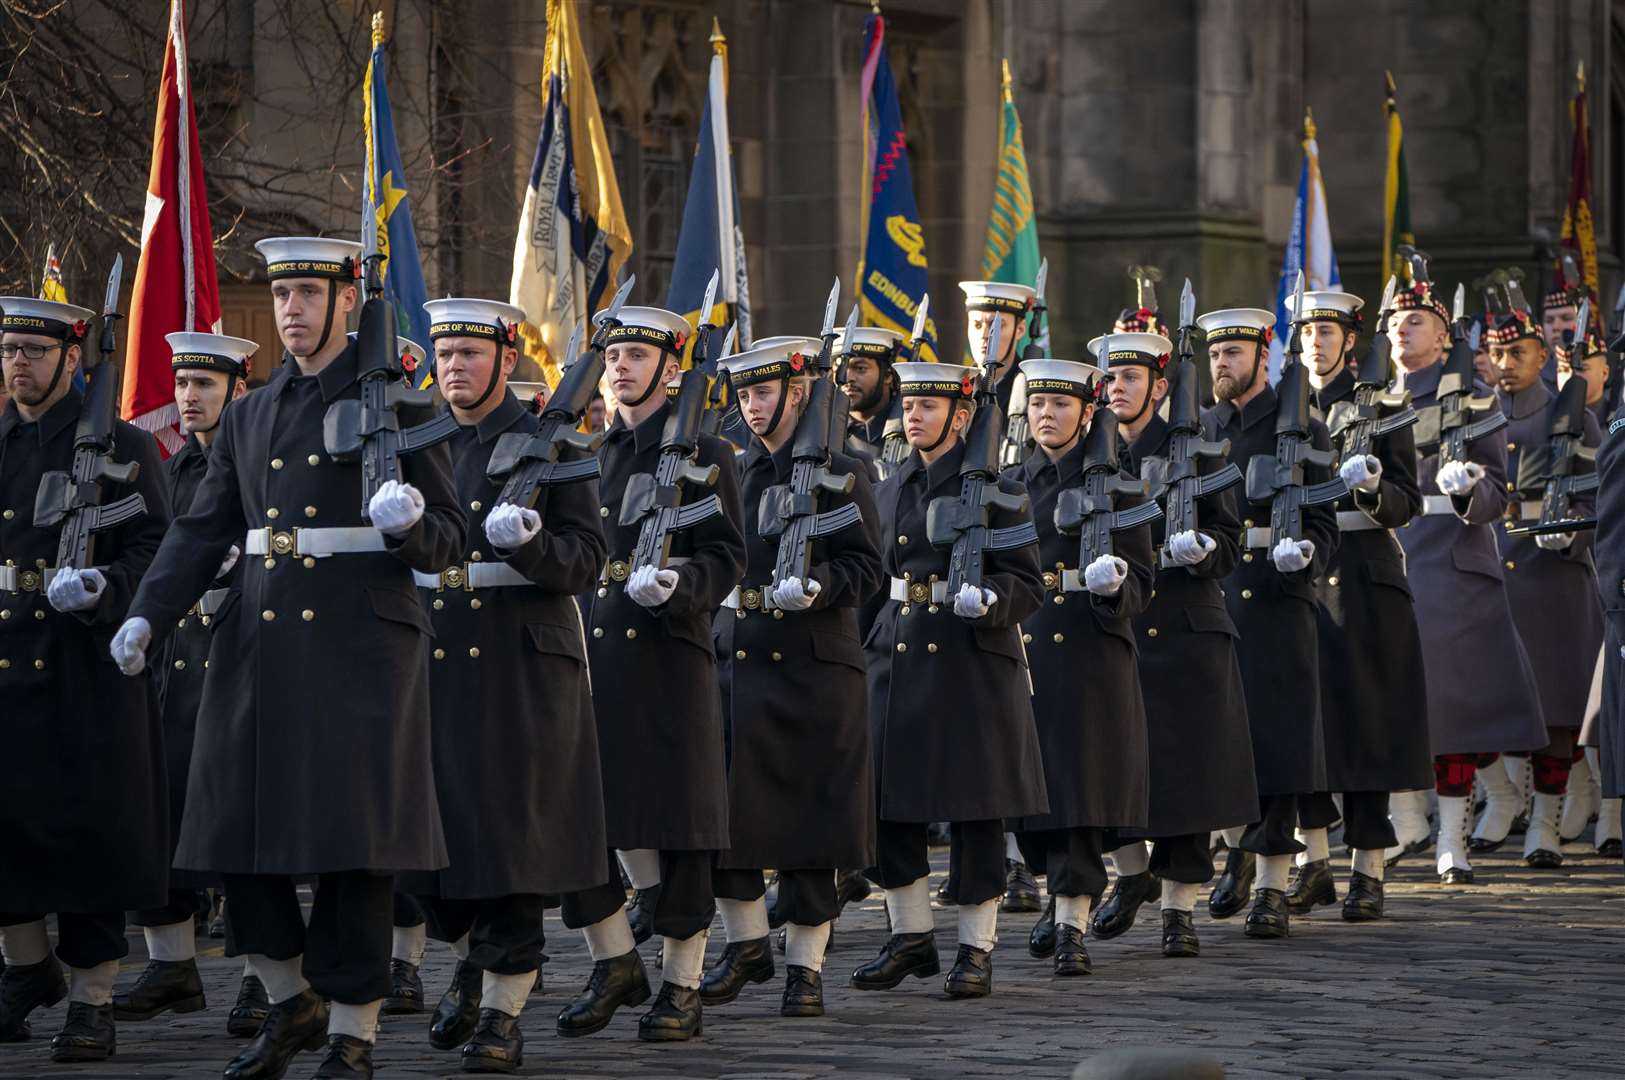 Members of the armed forces marched down the Royal Mile (Jane Barlow/PA)